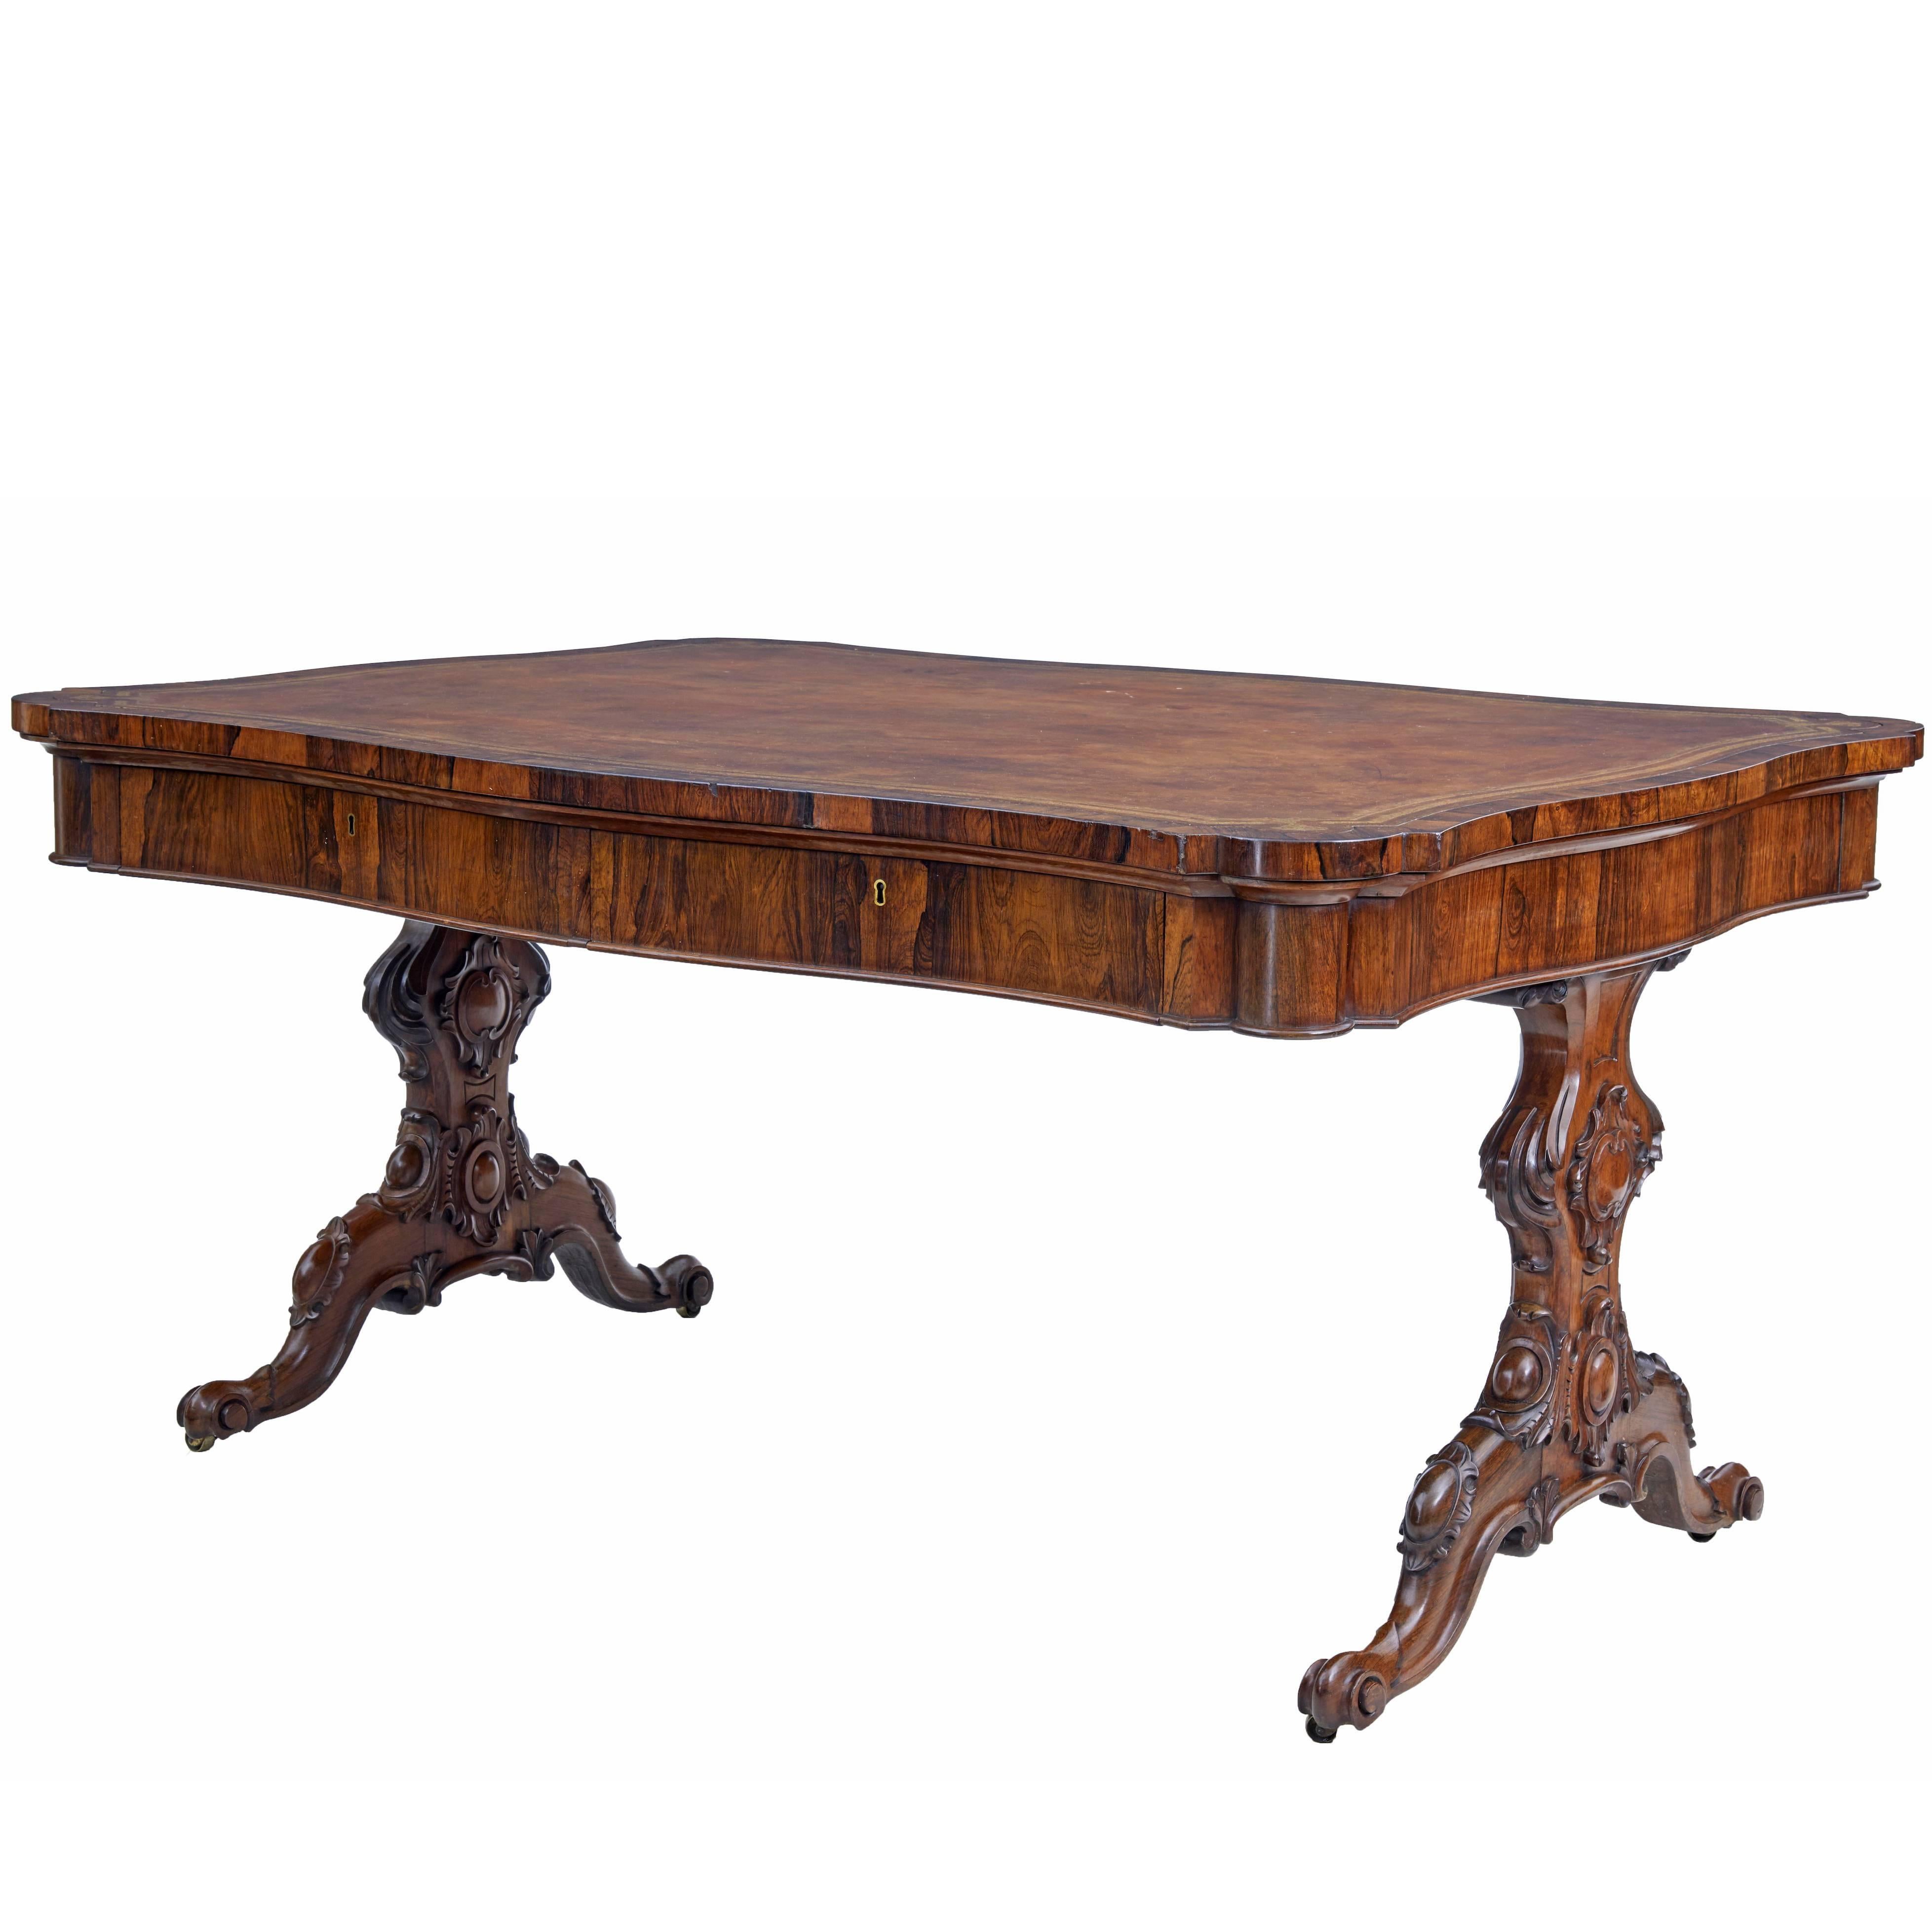 Large 19th Century William iv Rosewood Library Table Attributed to Gillows